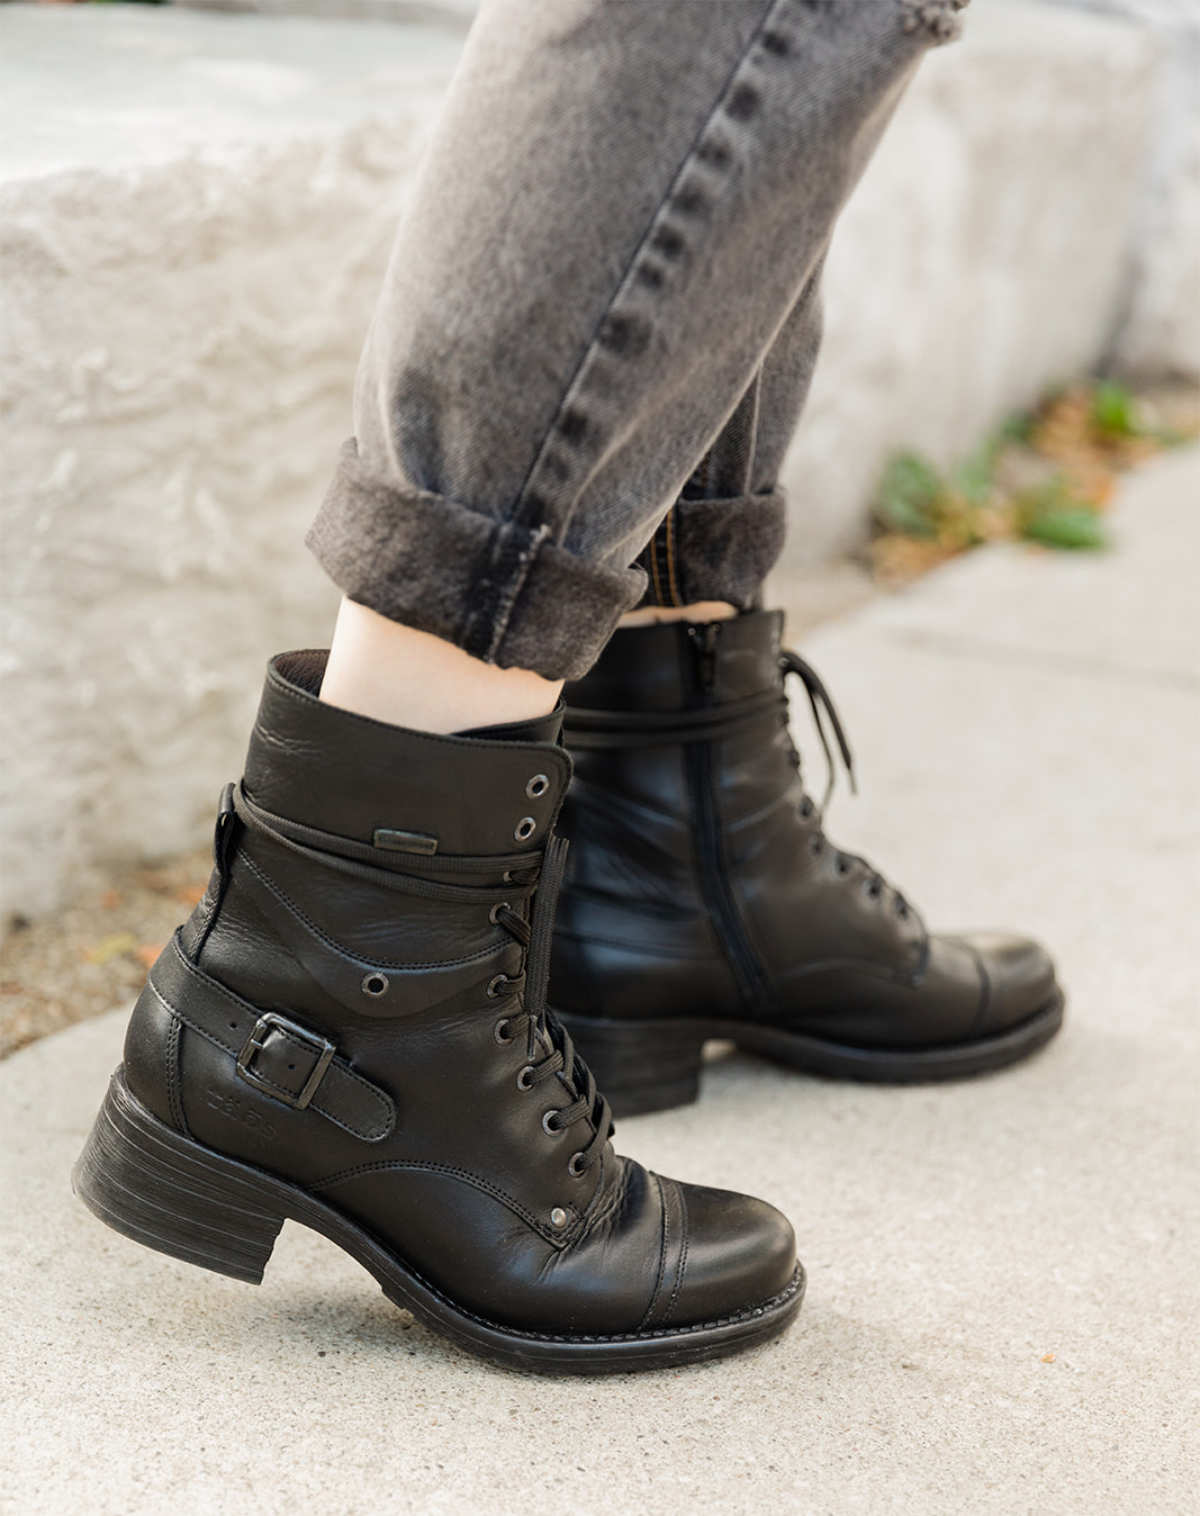 Cropped view of woman's feet wearing Taos crave combat boots in black waterproof with cuffed grey jeans on a sidewalk.